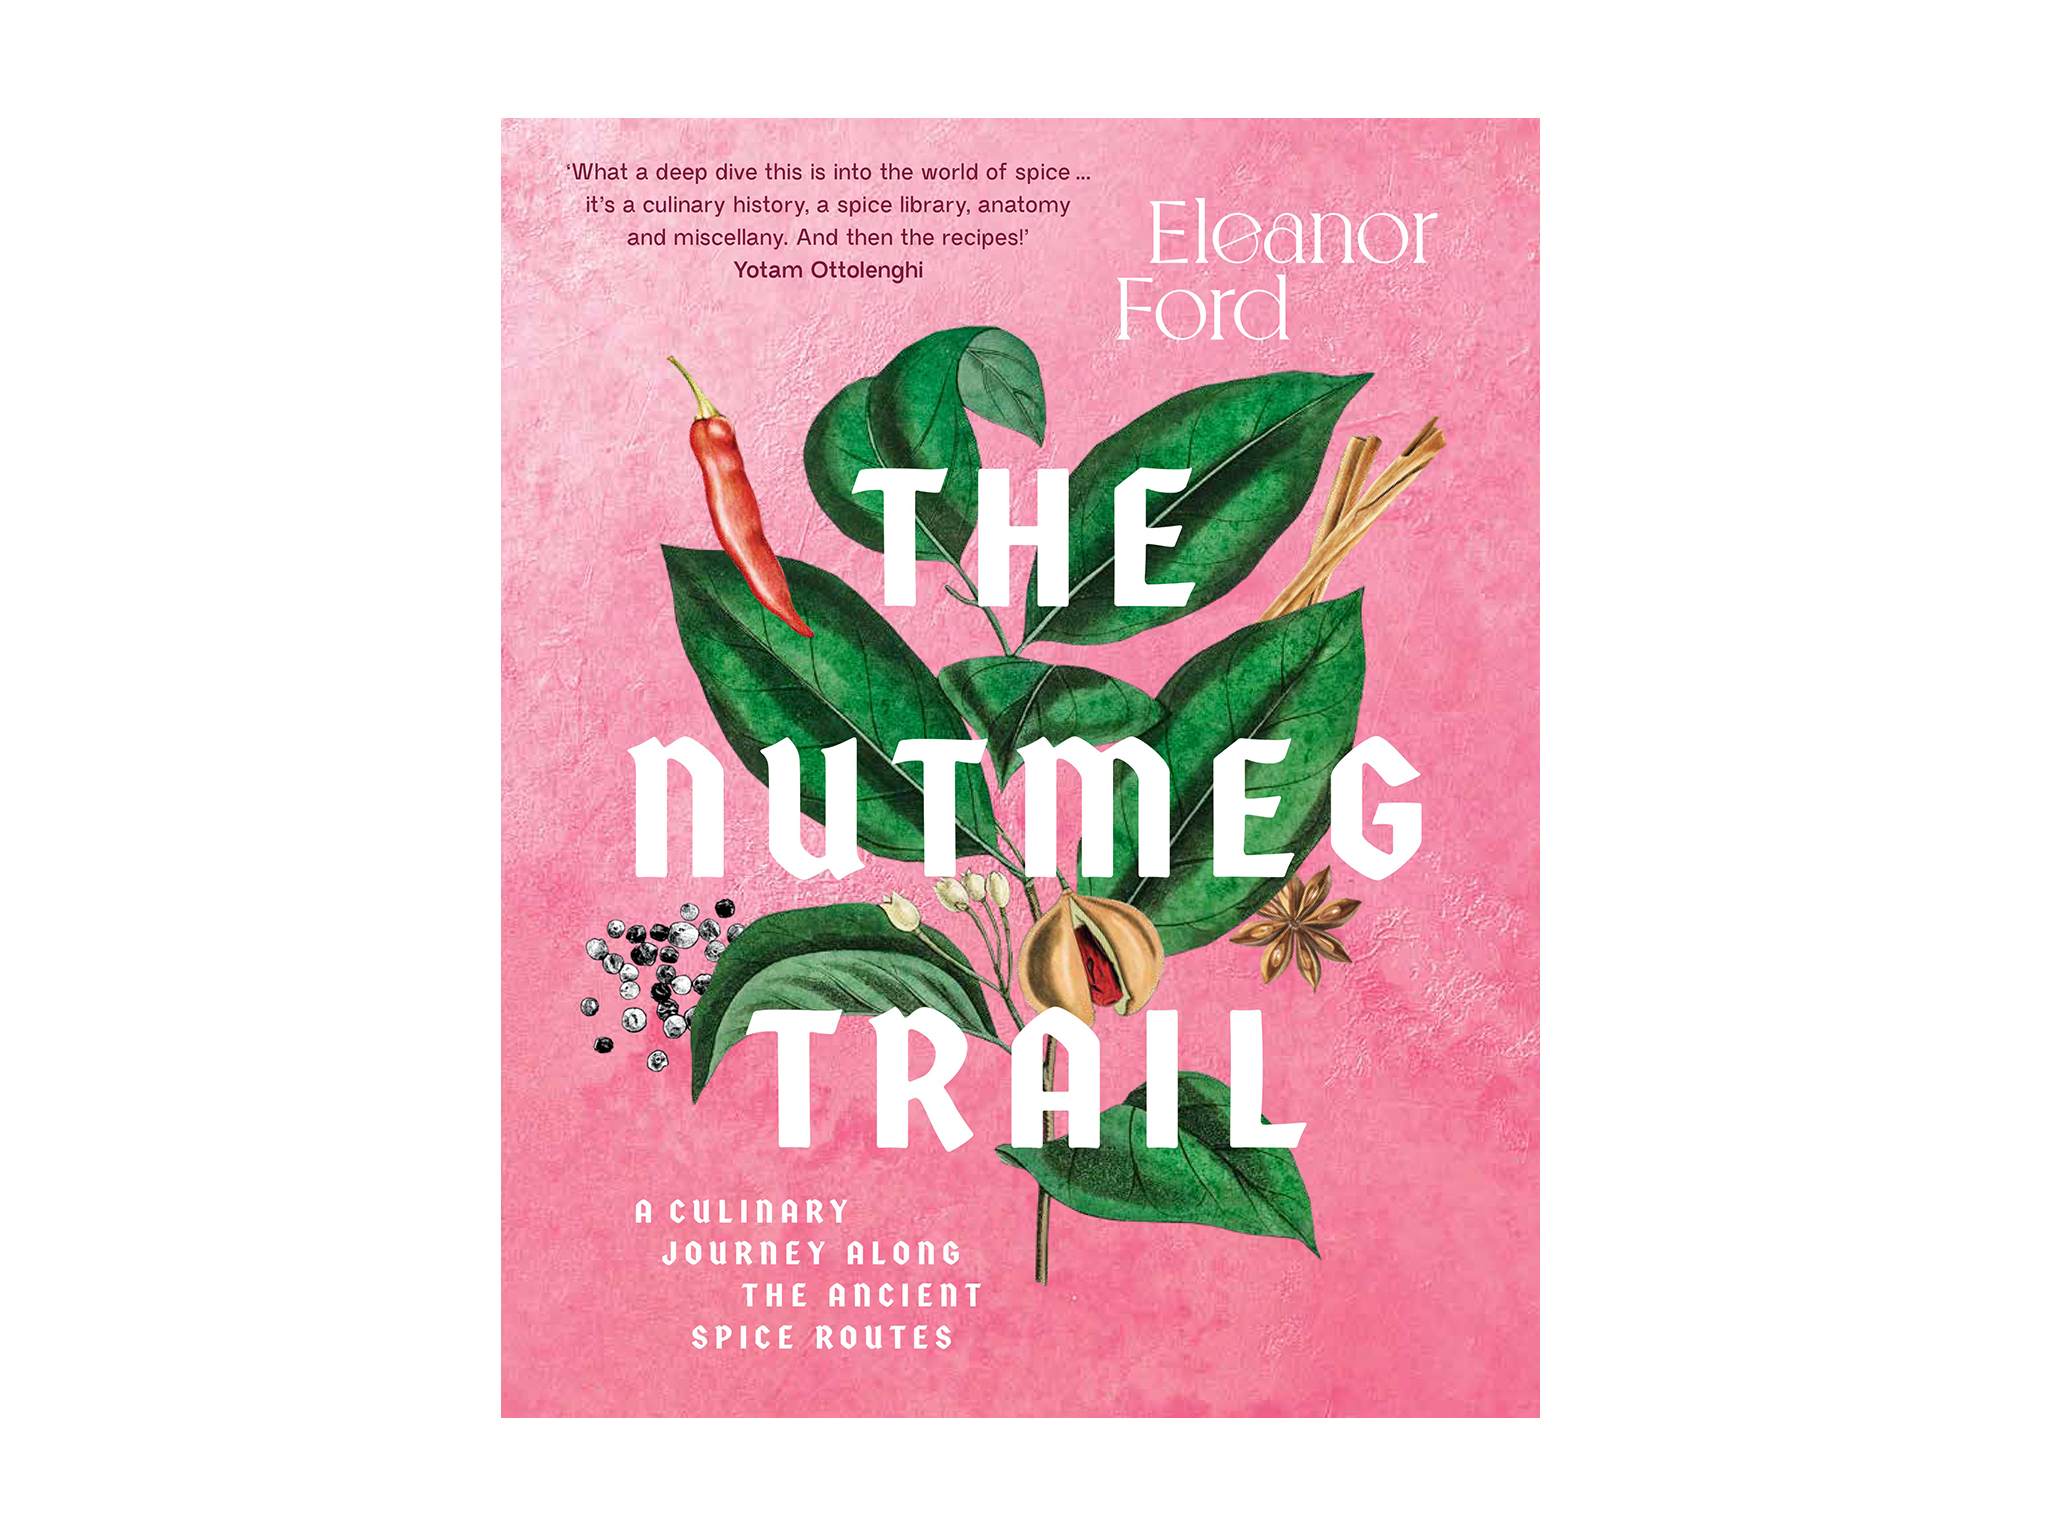 ‘The Nutmeg Trail’ by Eleanor Ford, published by Murdoch